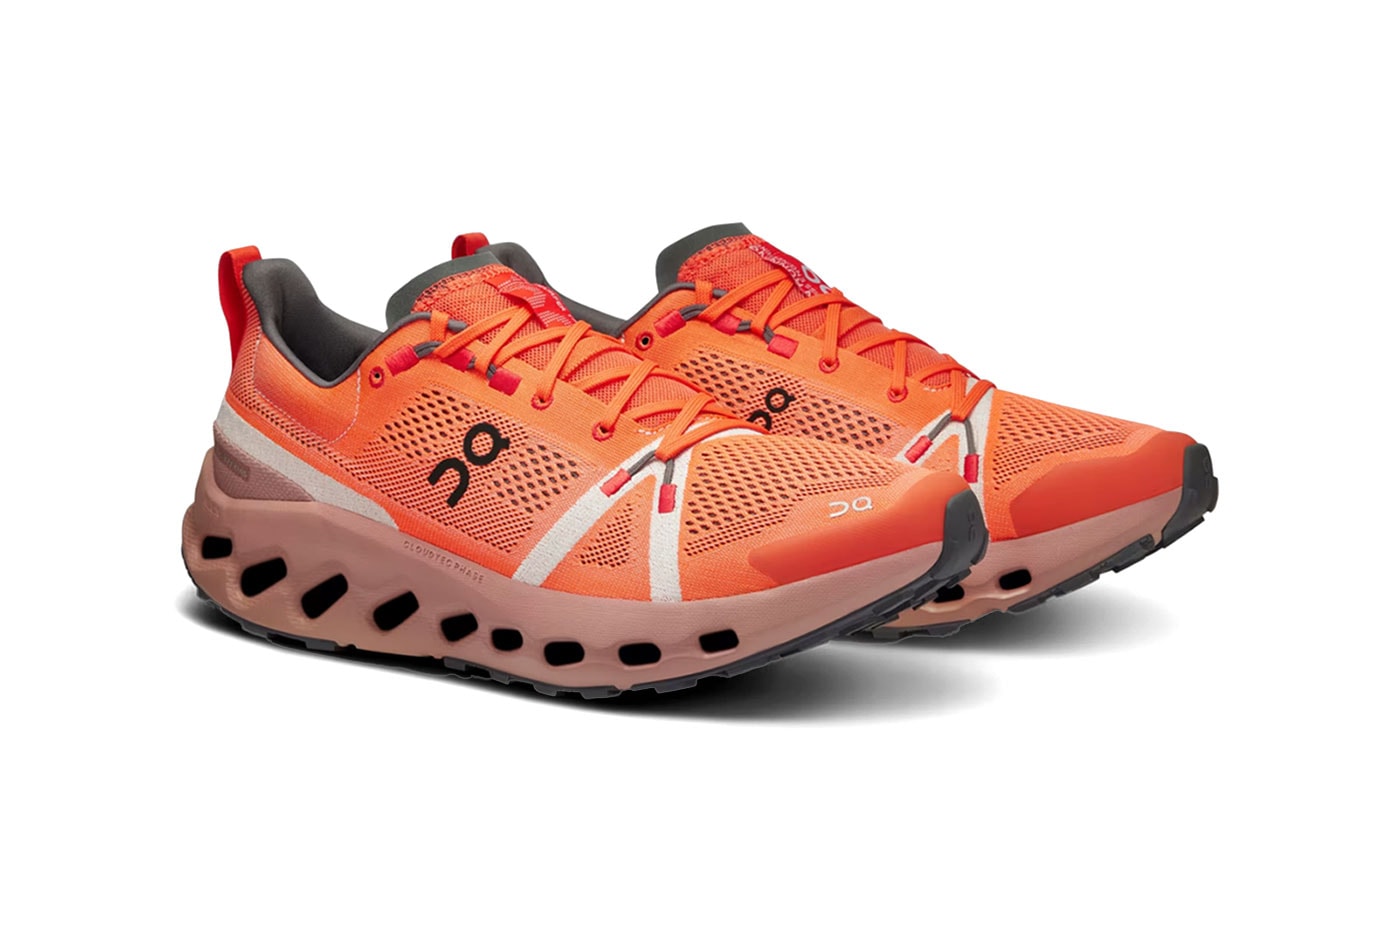 On Cloudsurfer Trails Release Info CloudTec Phase technology Running Shoes Helion Foam